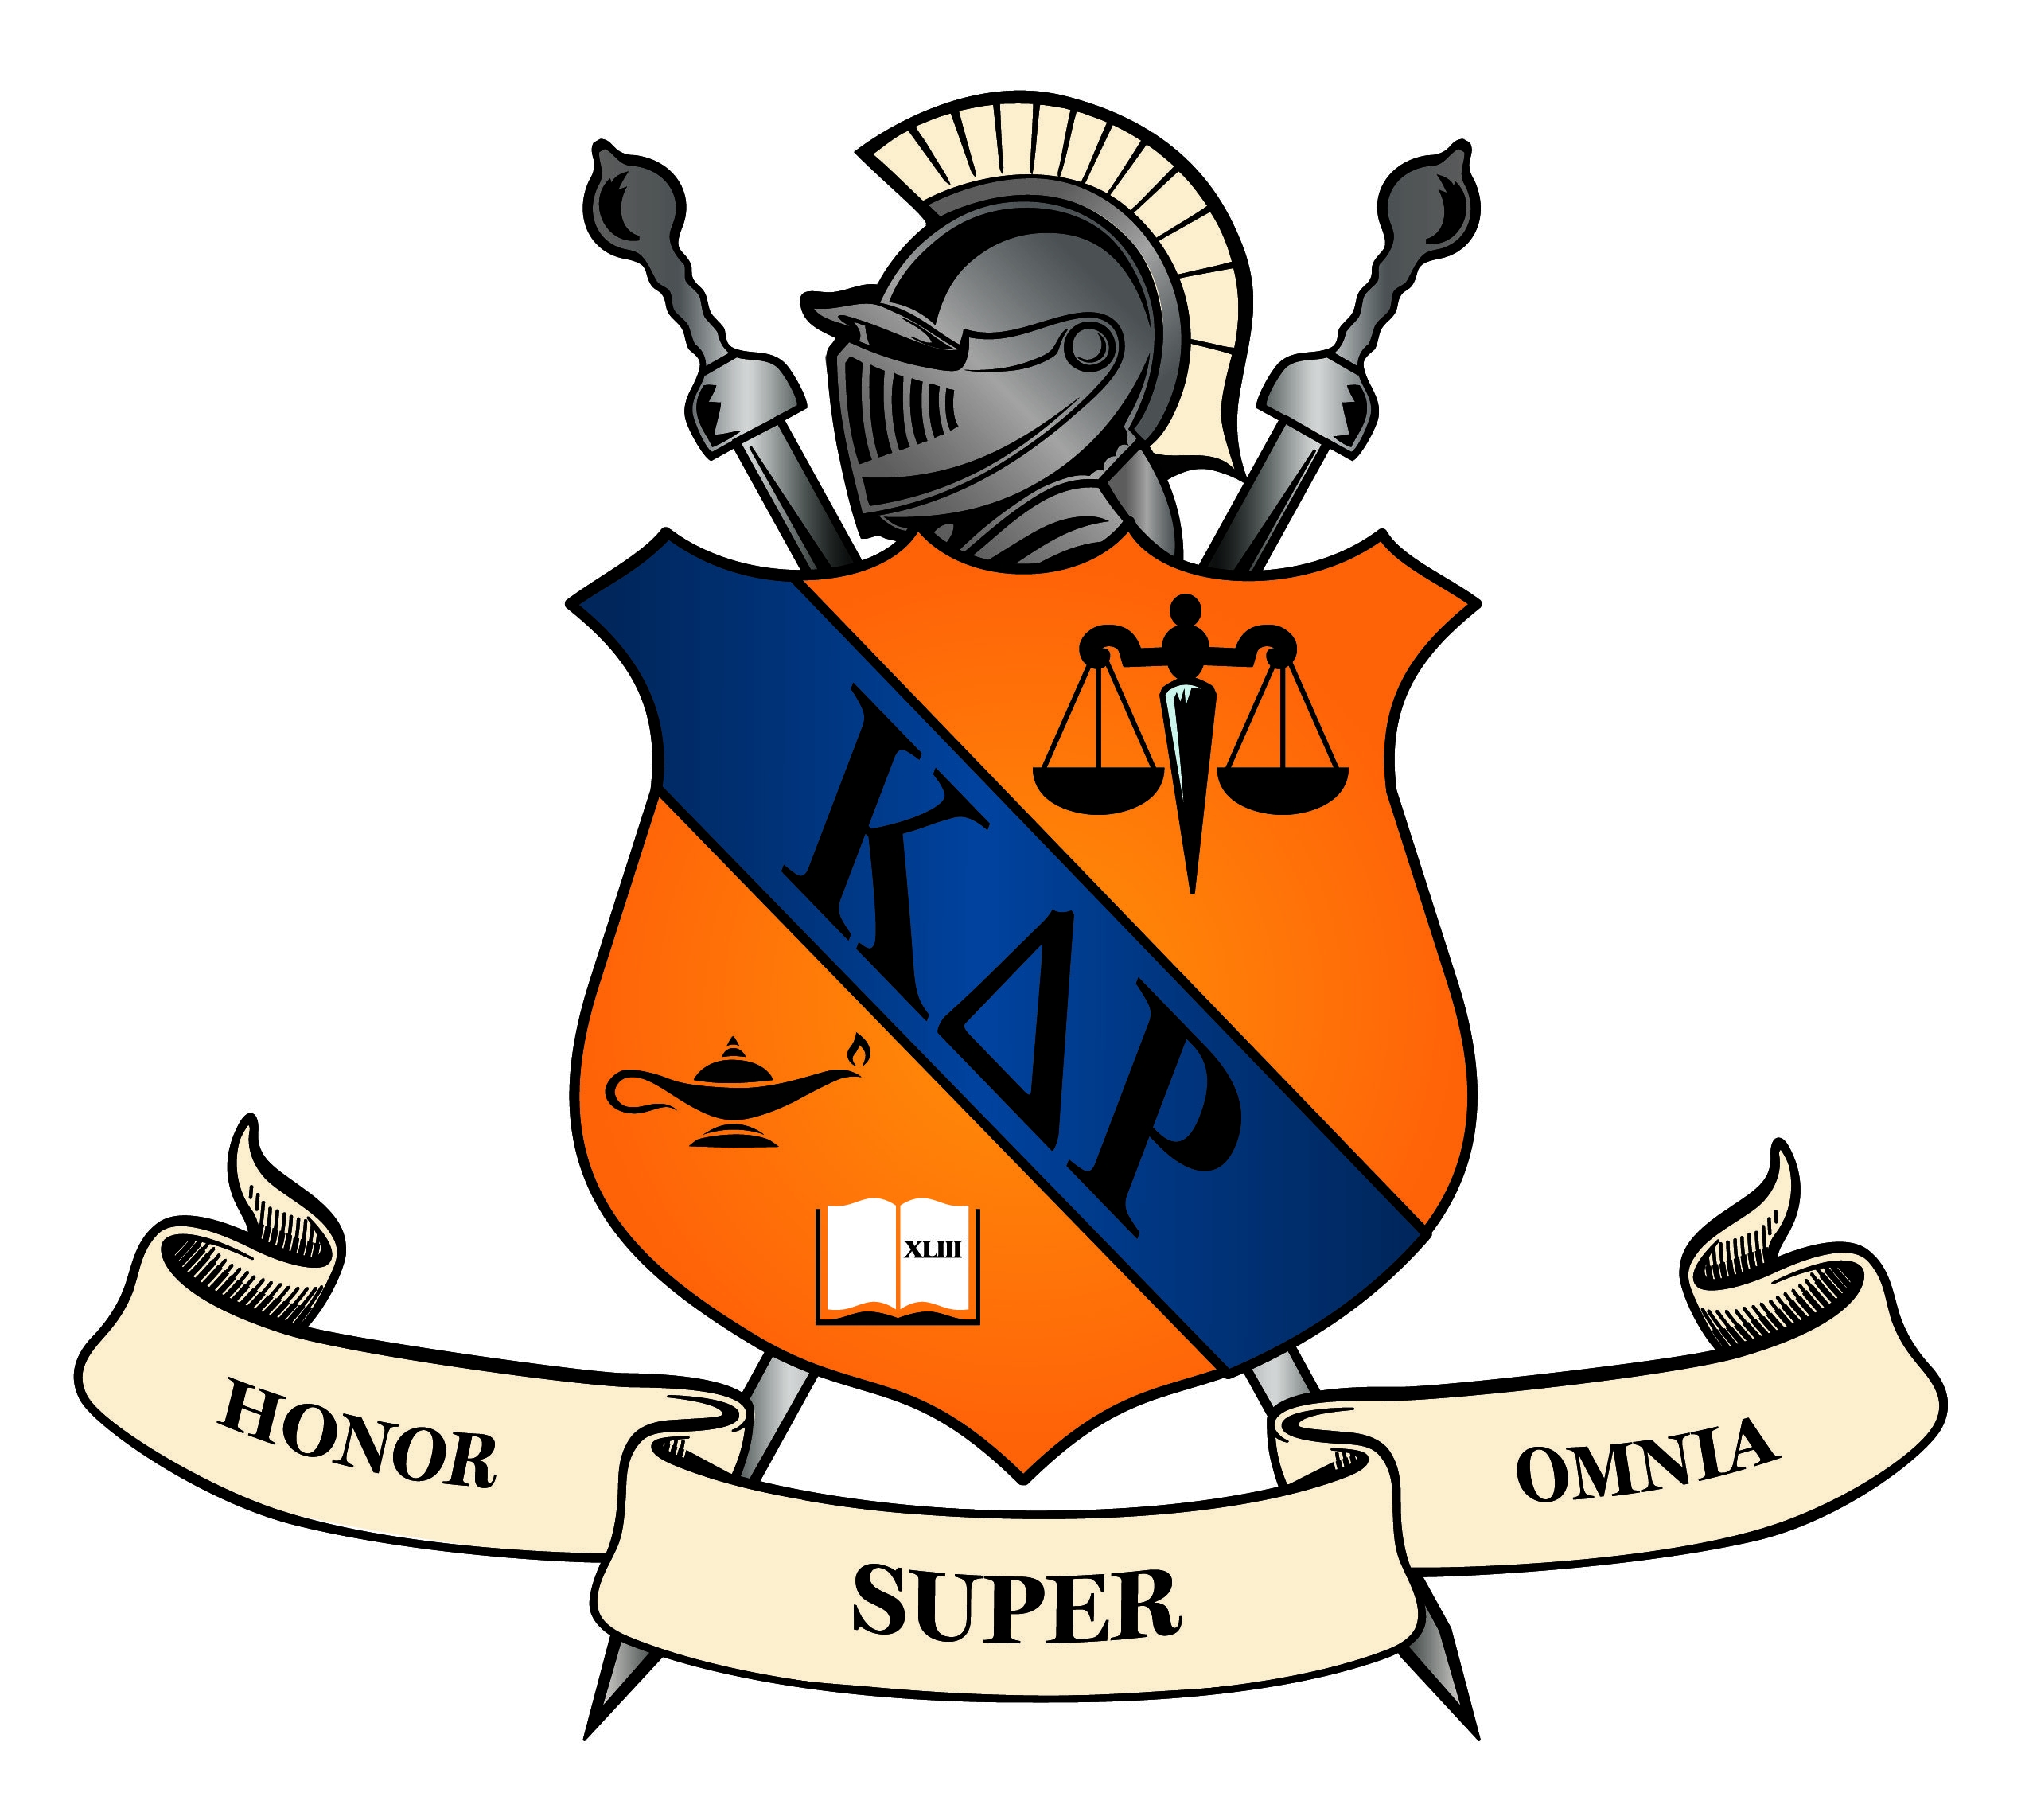 Kappa Delta Rho crest showing colors of blue and orange